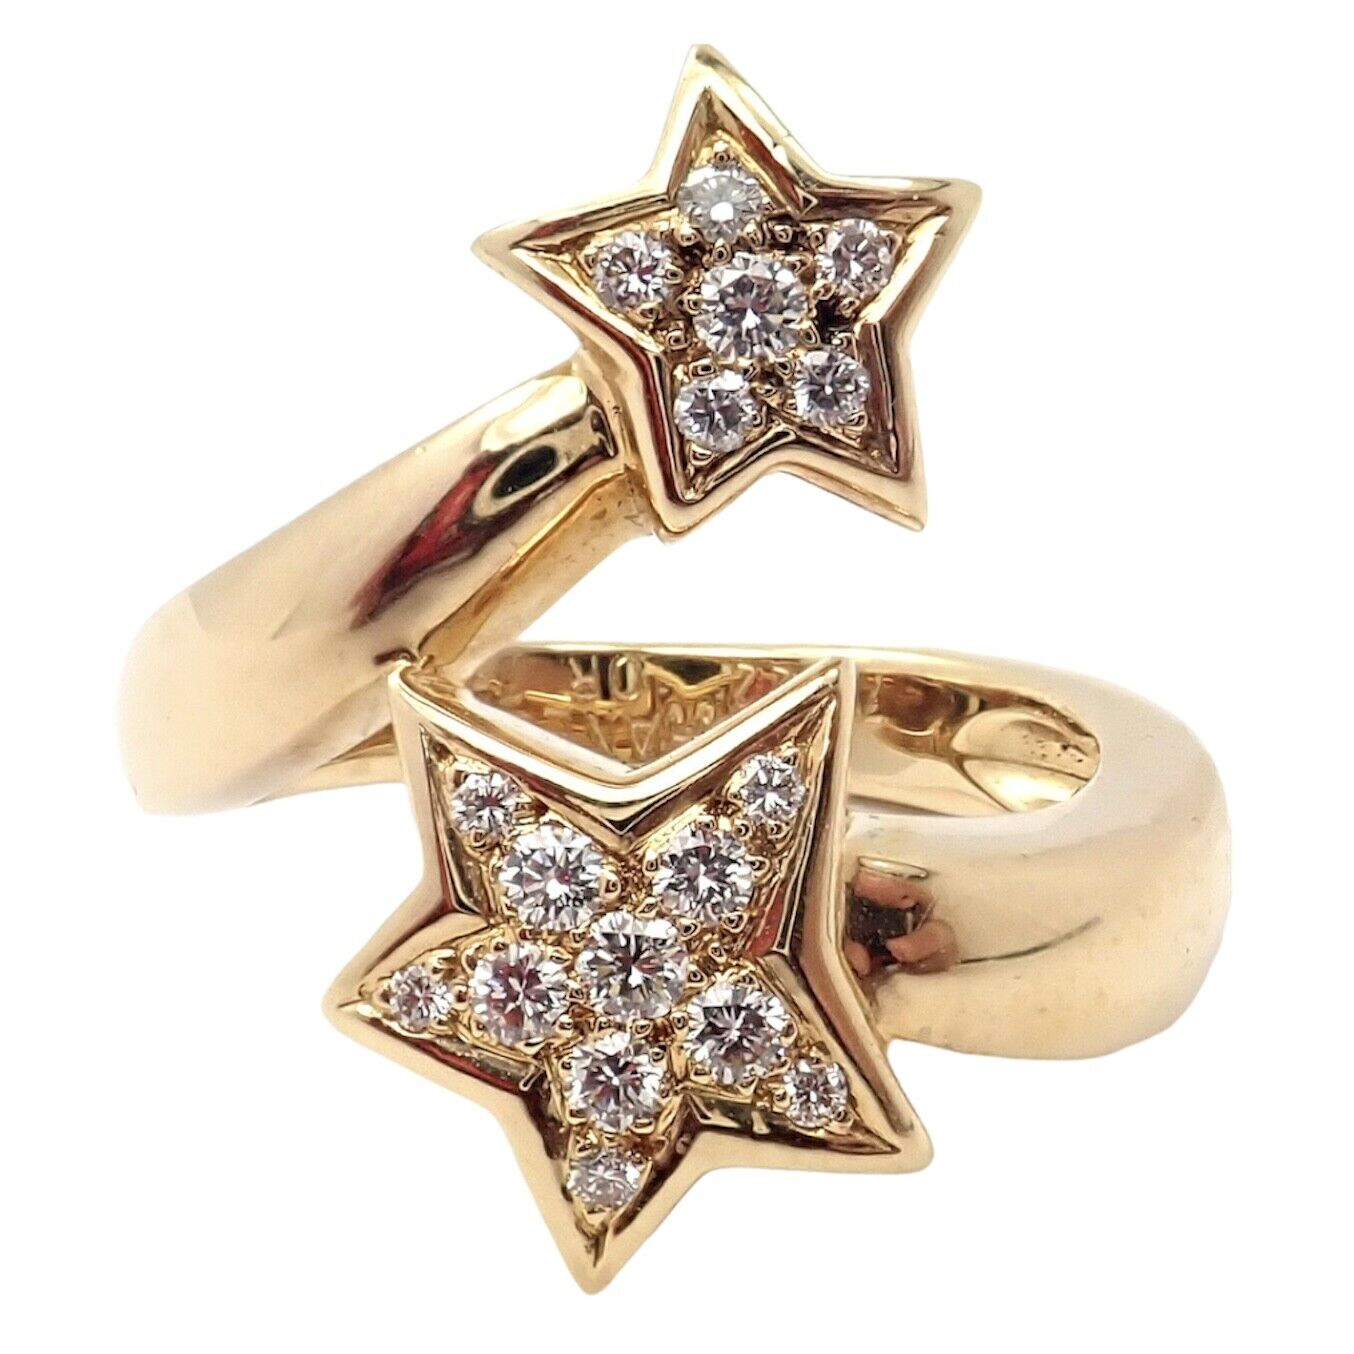 Authentic! Chanel Comete 18K Yellow Gold Star Diamond Cocktail Ring